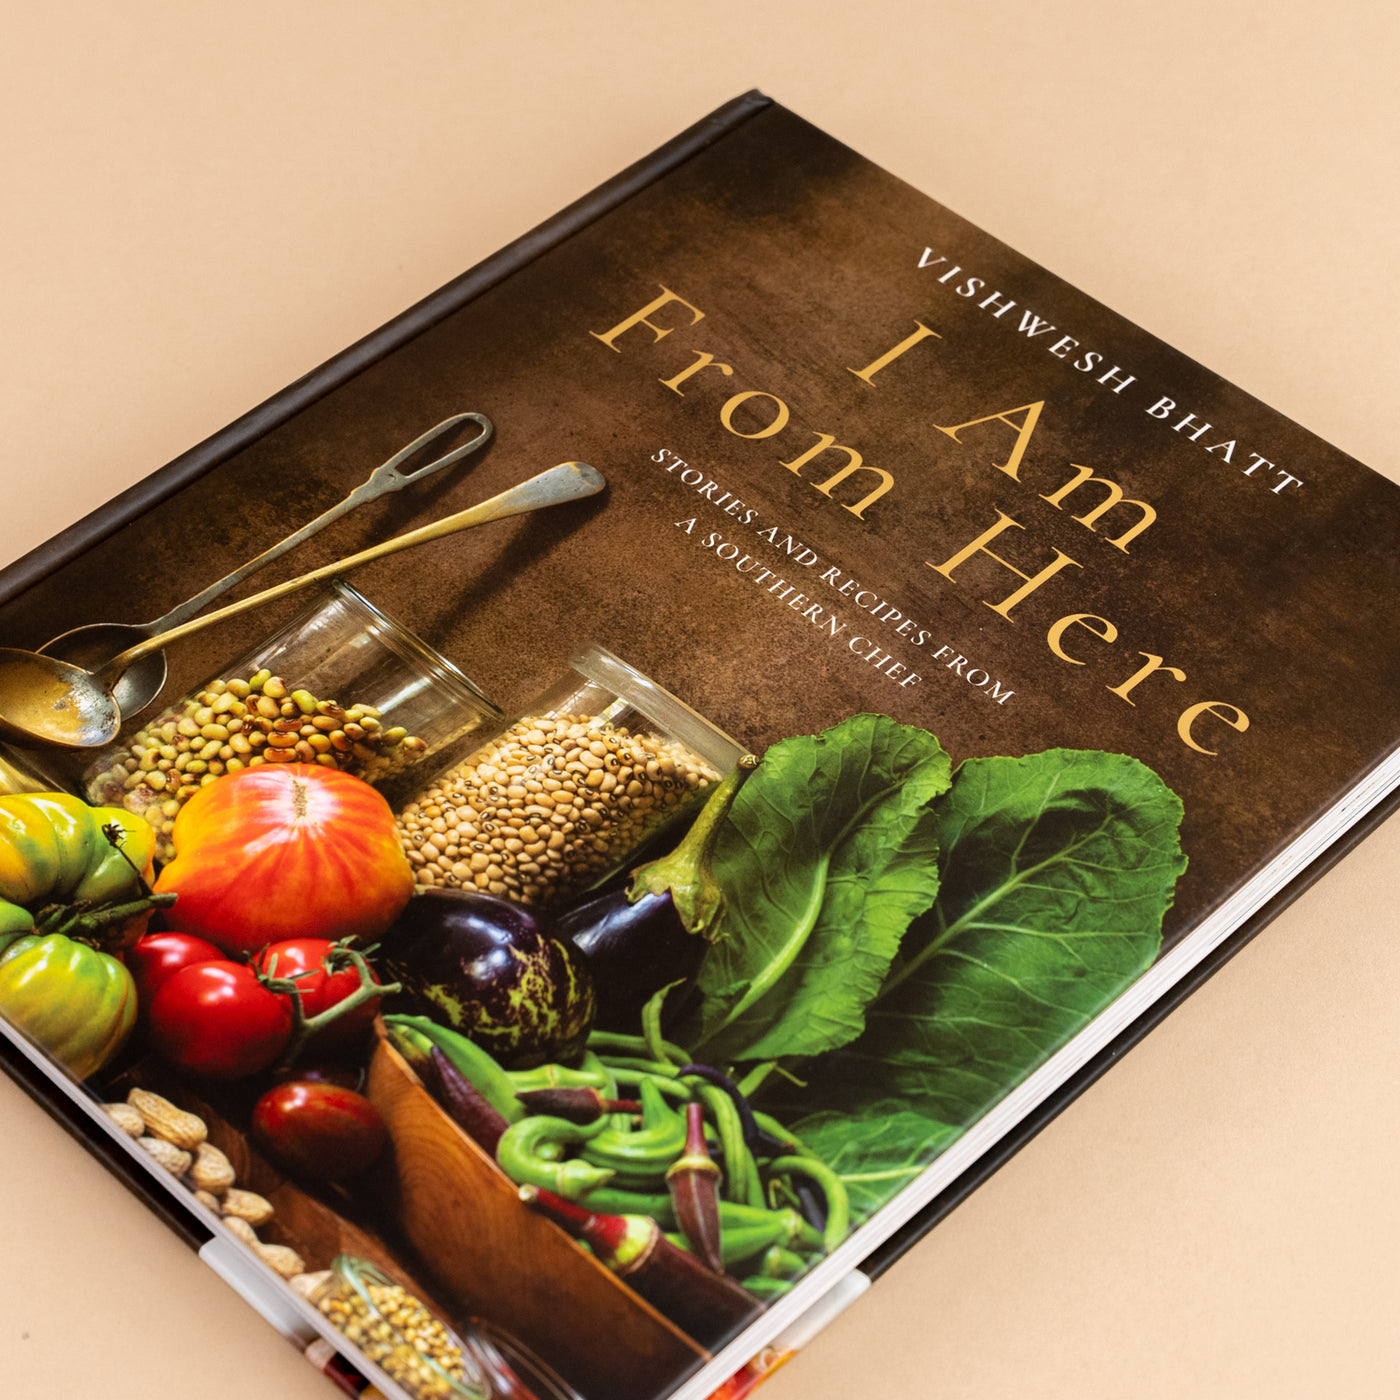 I Am From Here: Stories & Recipes from a Southern Chef